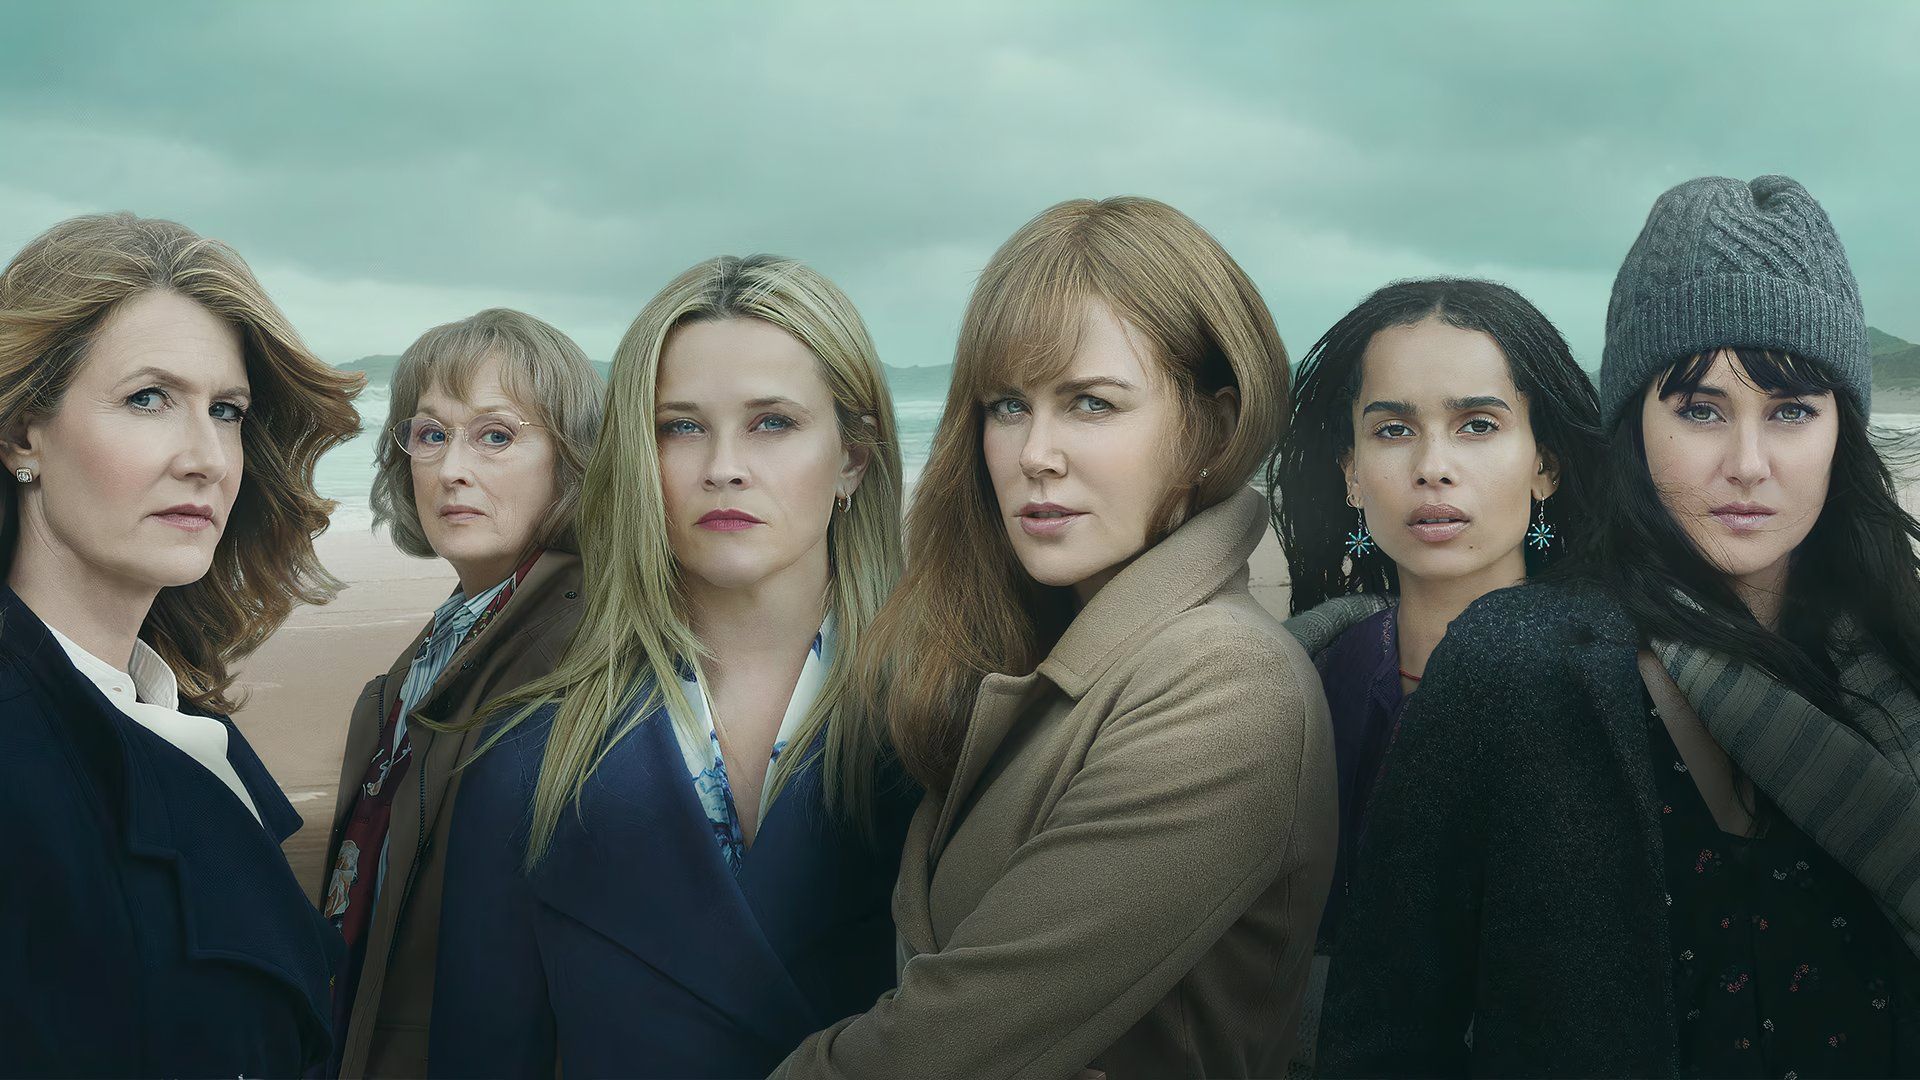 The cast of Big Little Lies season 2 stand together, including Laura Dean, Meryl Streep, Reese Witherspoon, Nicole Kidman, Zoe Kravitz, and Shailene Woodley